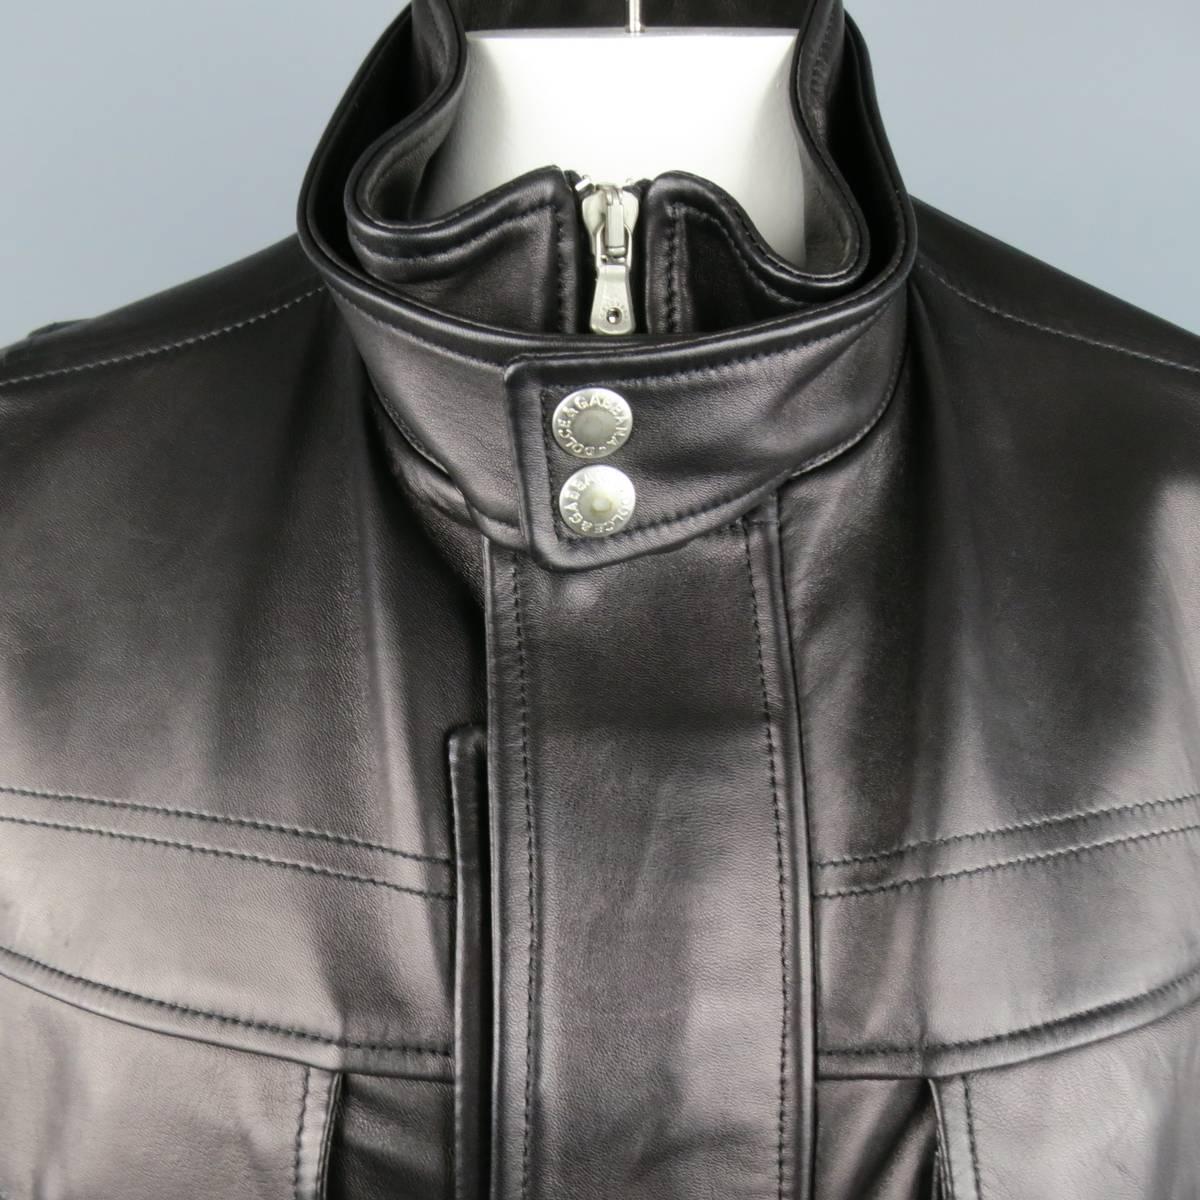 DOLCE & GABBANA jacket in a smooth black leather featuring a high collar with snap band, double hidden placket zip and snap closure, patch flap breast pockets, slanted pockets, back tabs, and snap cuffs. Made in Italy.
 
Excellent Pre-Owned